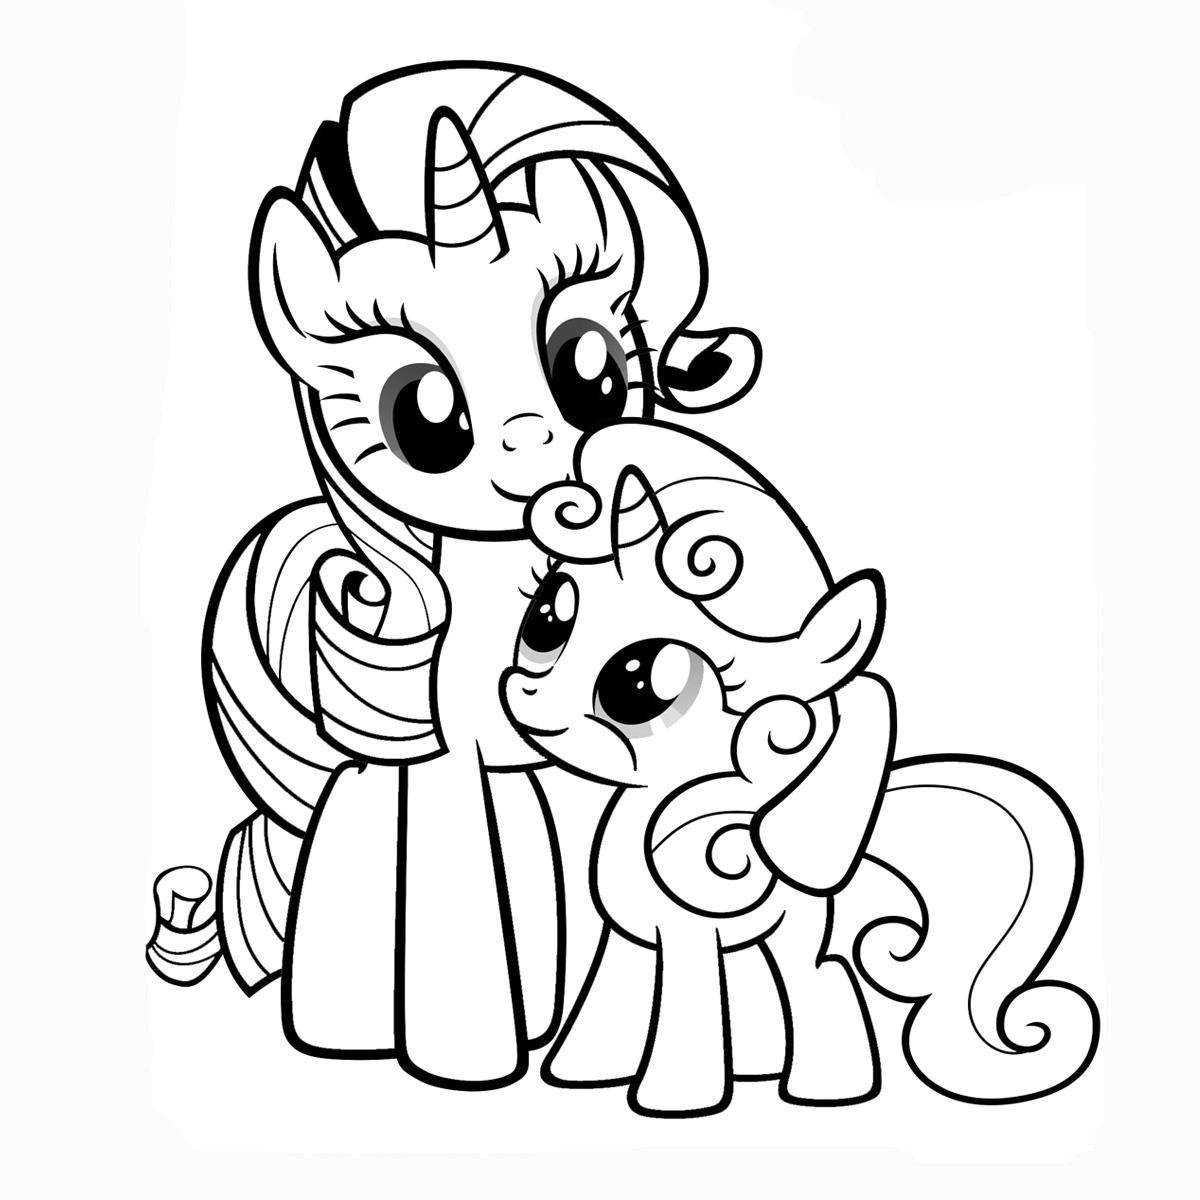 Coloring Pony and little pony. Category my little pony. Tags:  Pony, My little pony.